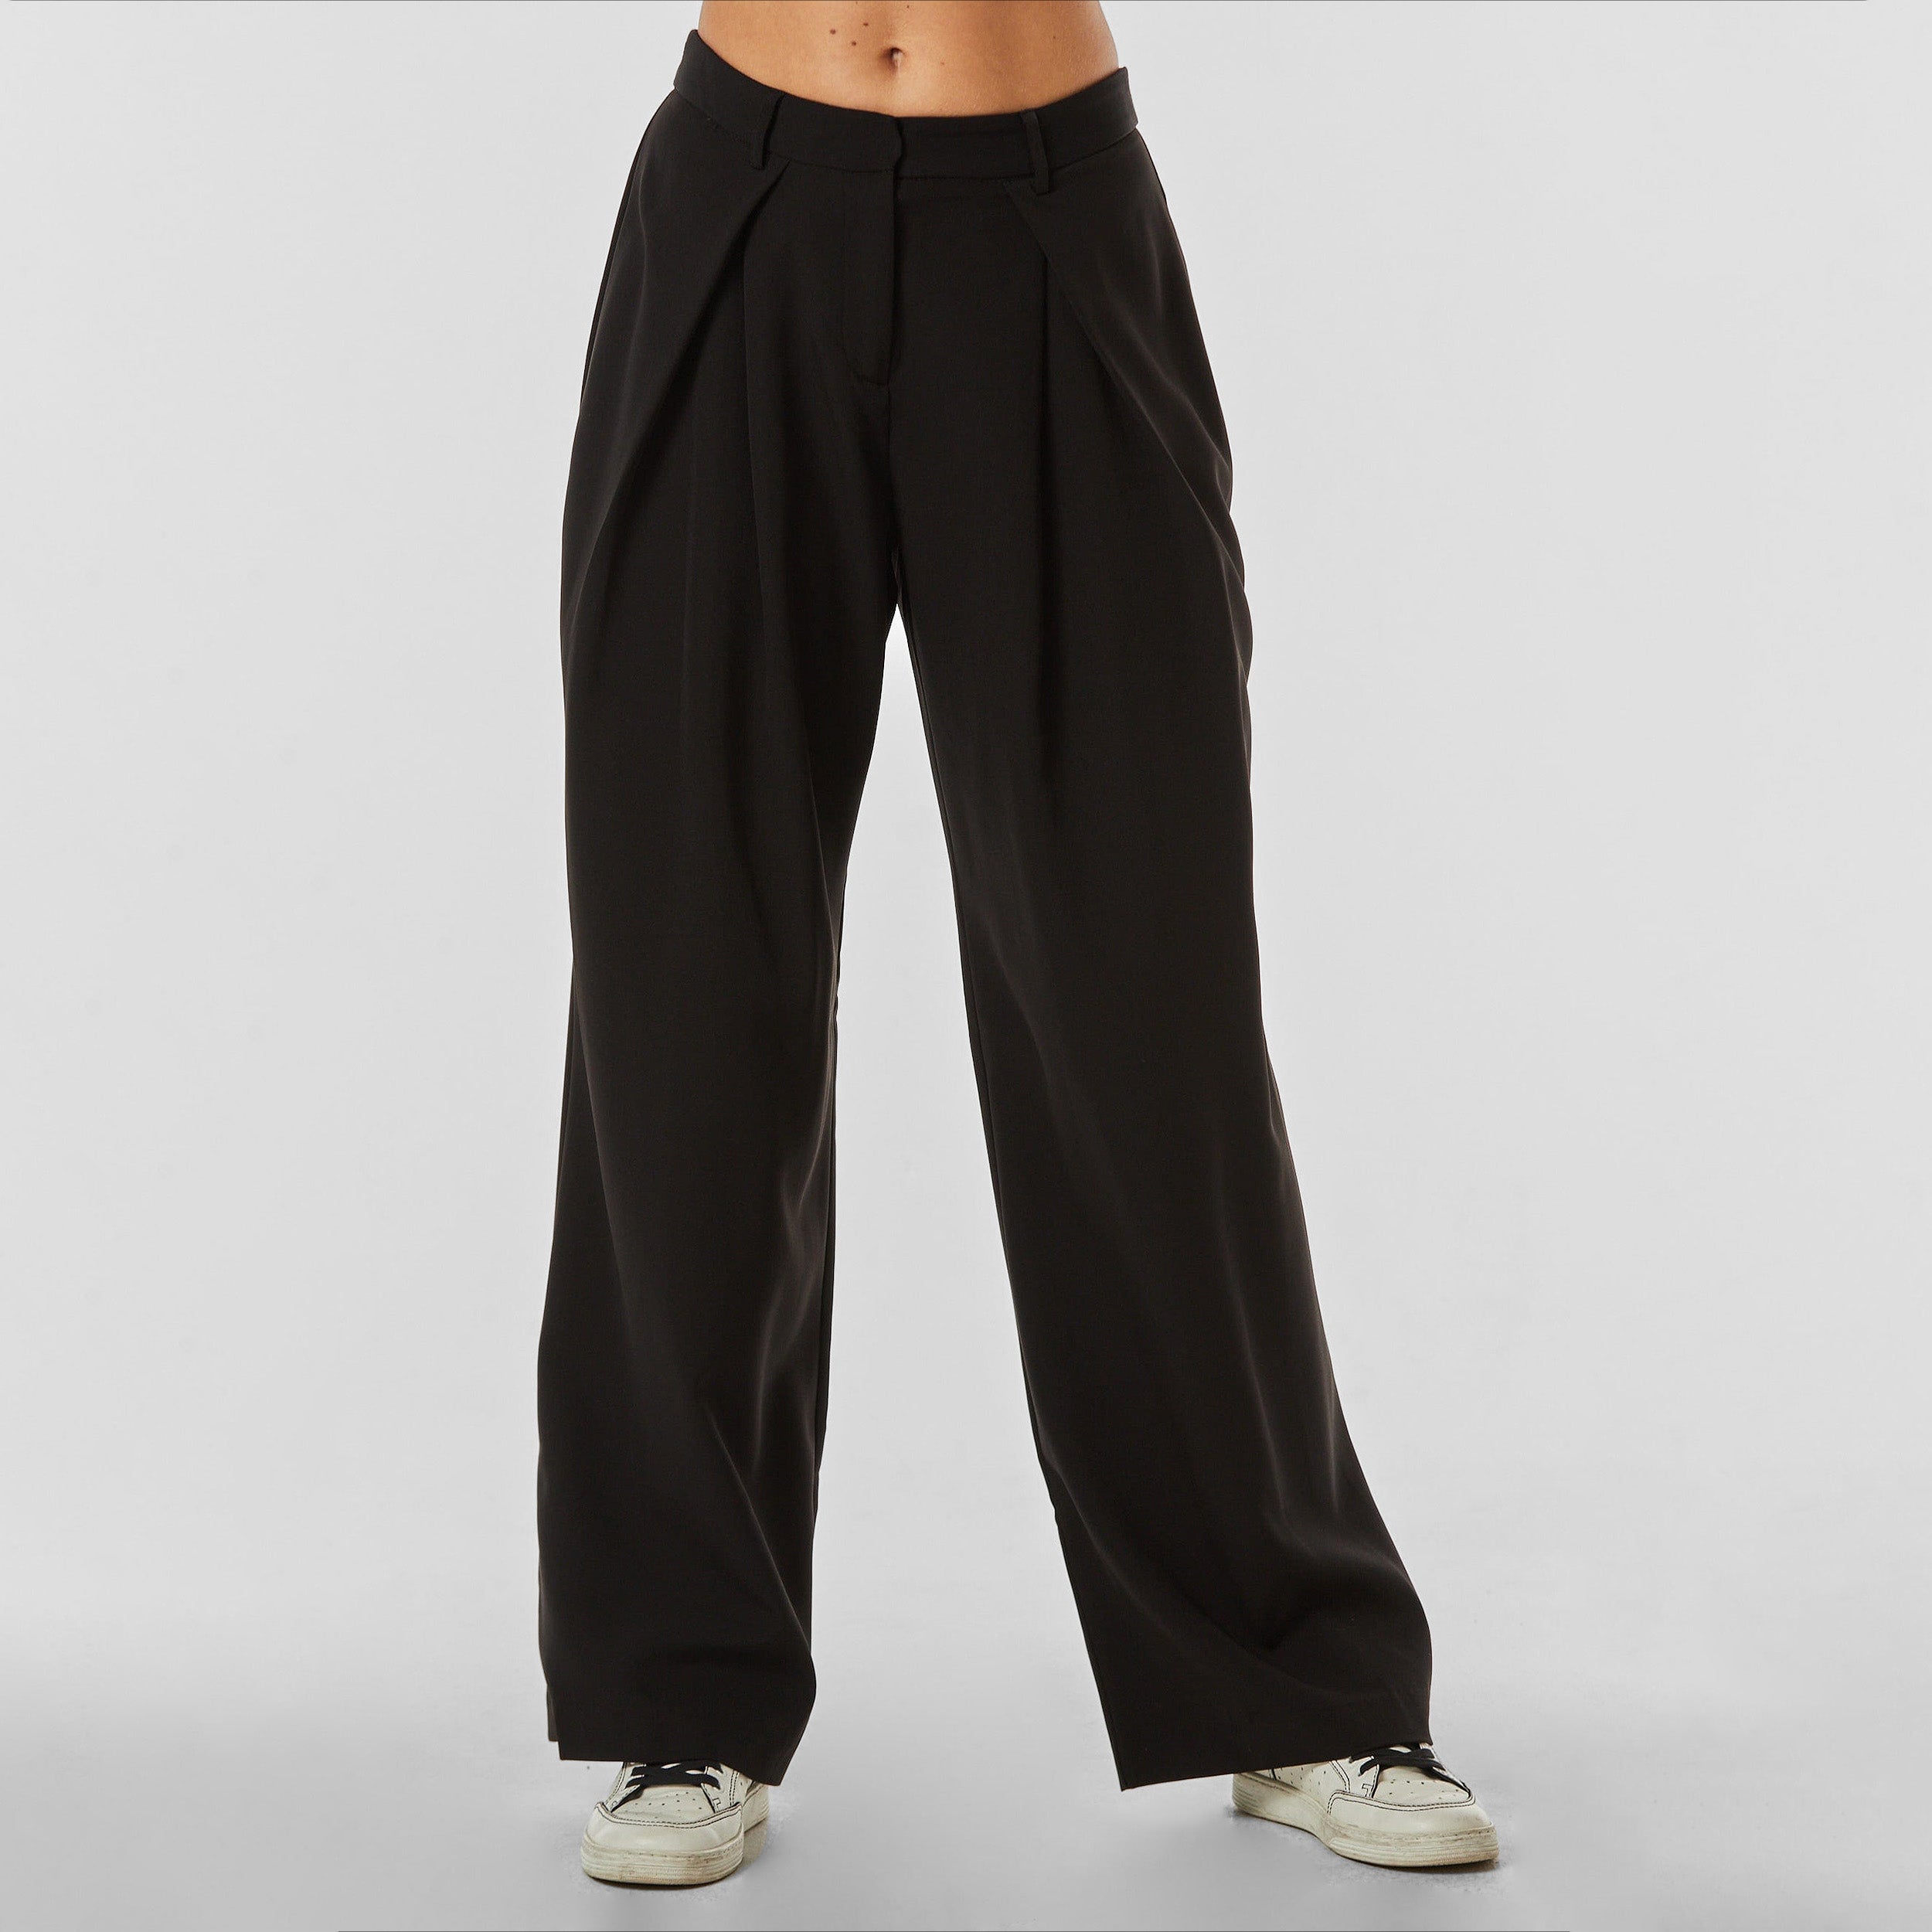 Front view of woman wearing pleated black trousers with stretch fabric